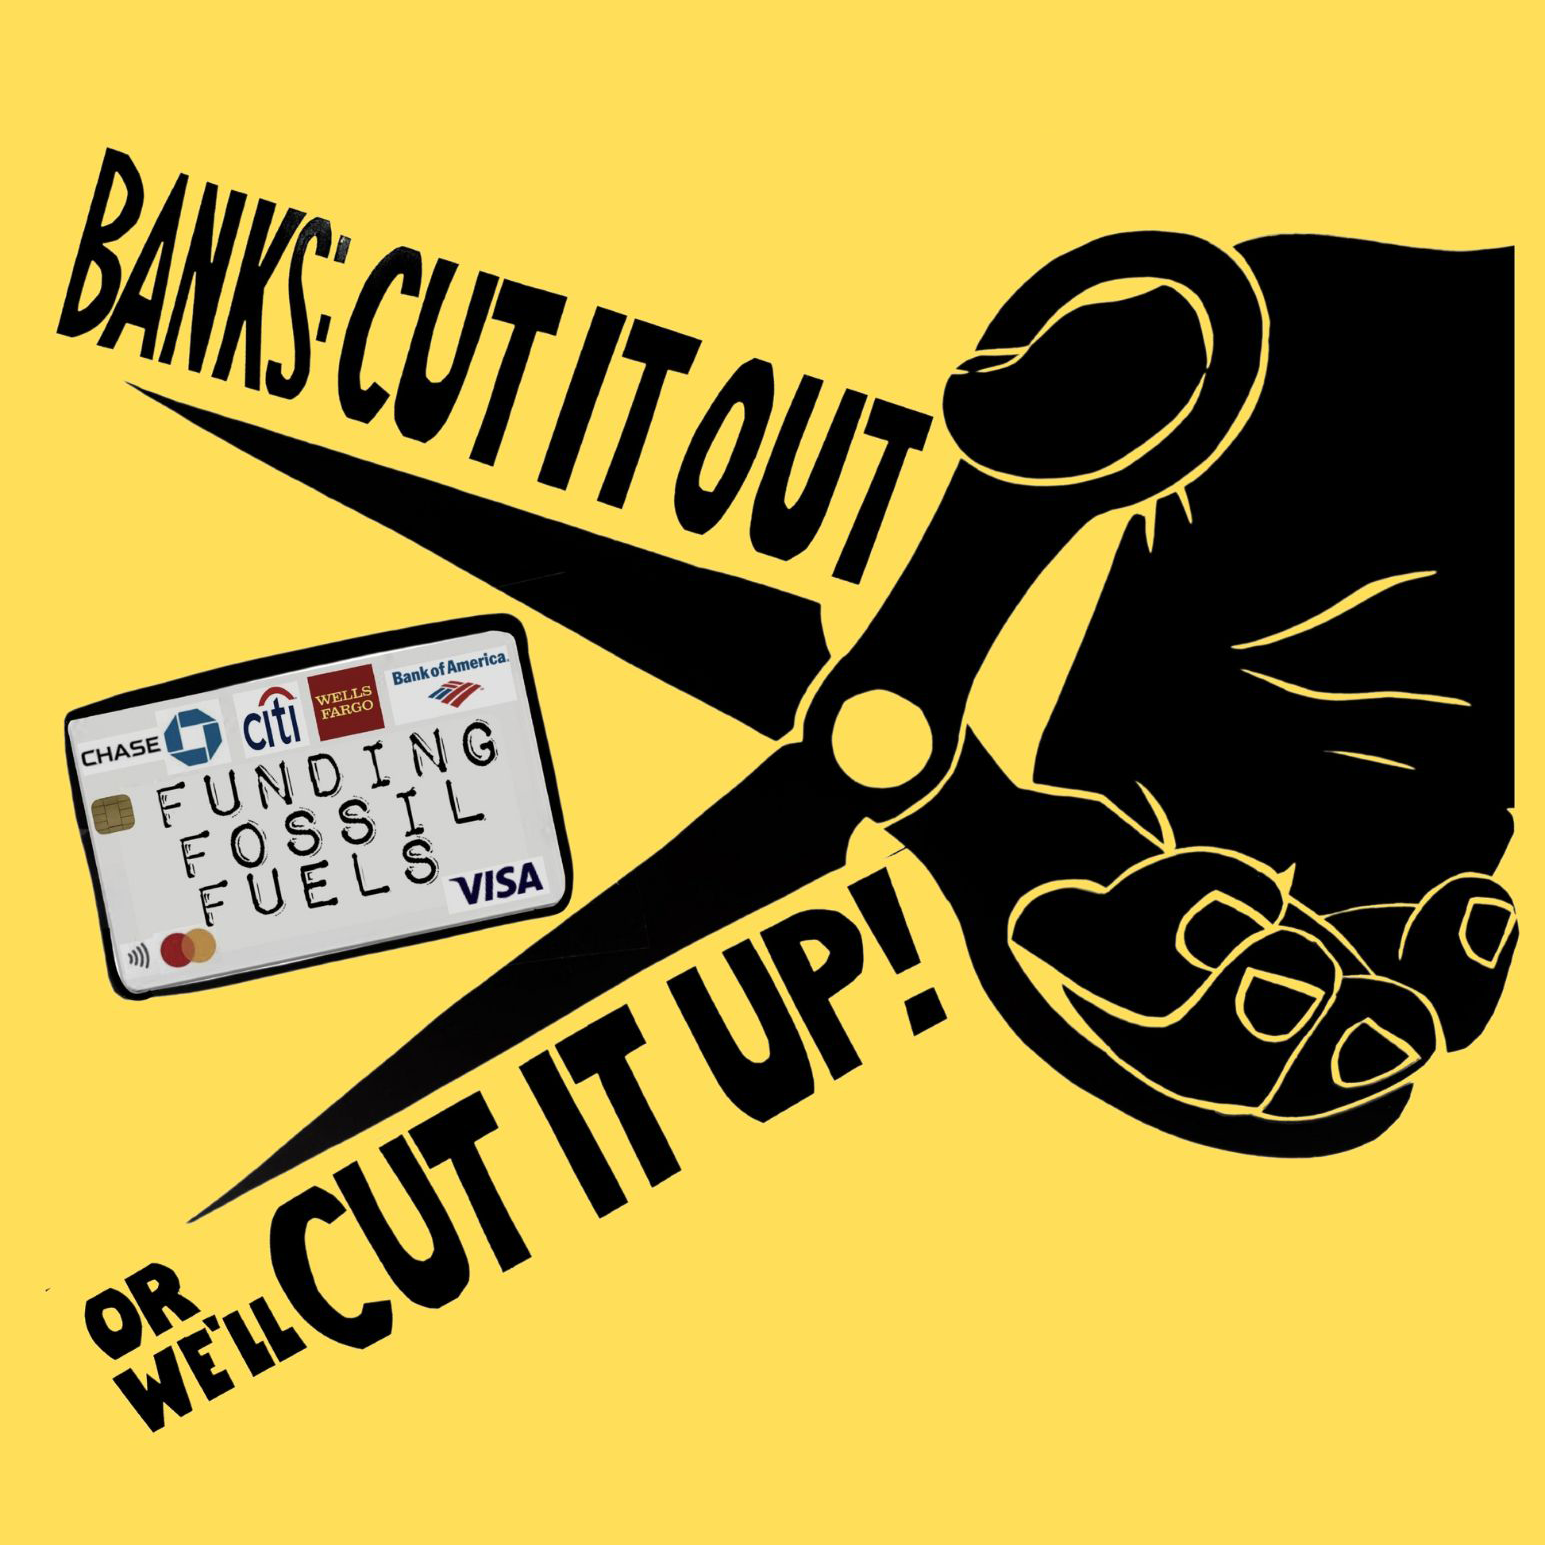 Banks cut it out or we'll cut it up